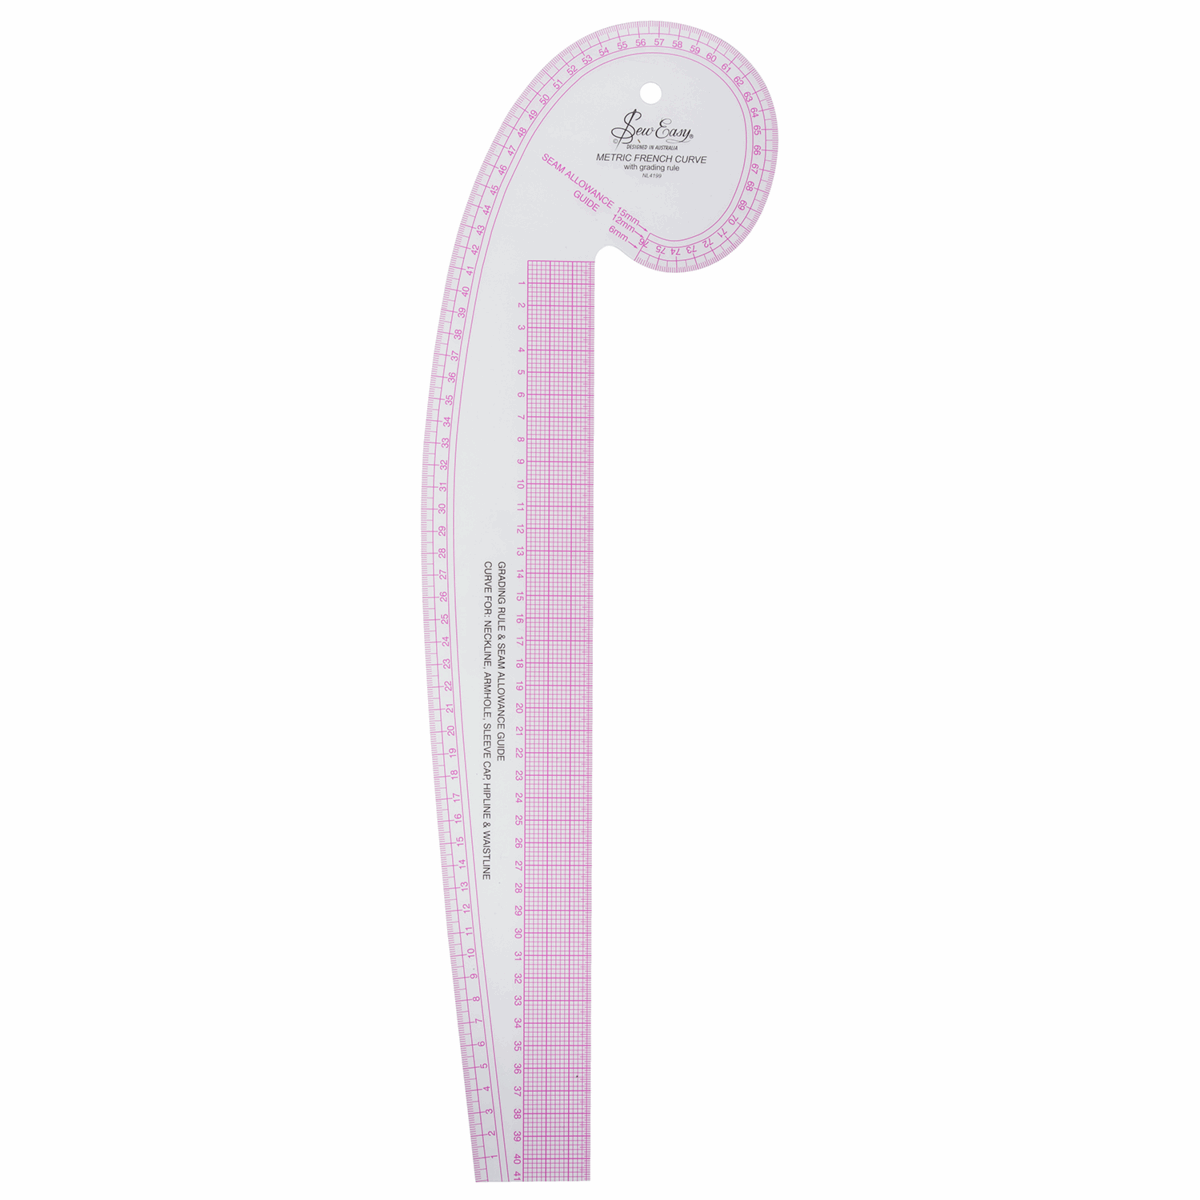 Sew Easy - French Curve and Grading Ruler -  Metric / Imperial